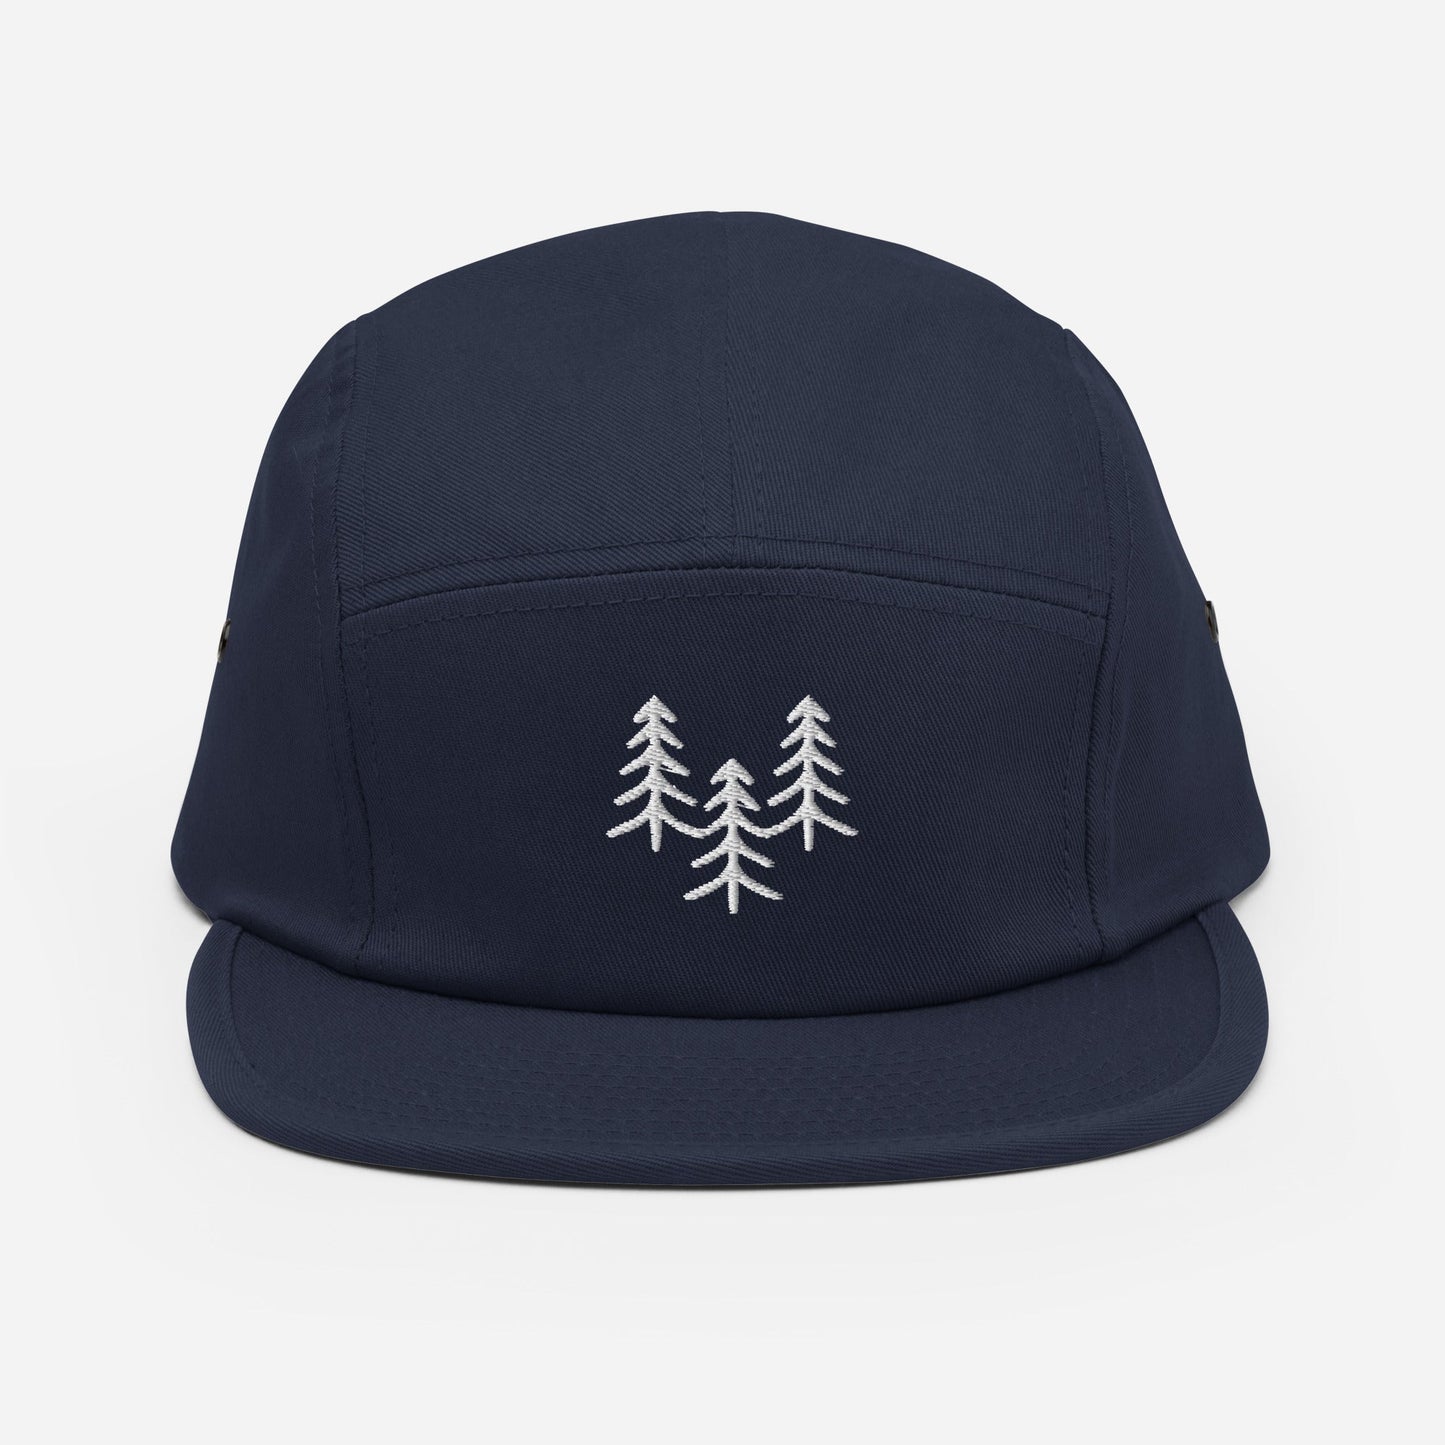 Embroidered Forest Five Panel Camper Cap - Appalachian Bittersweet - 5 panel camper